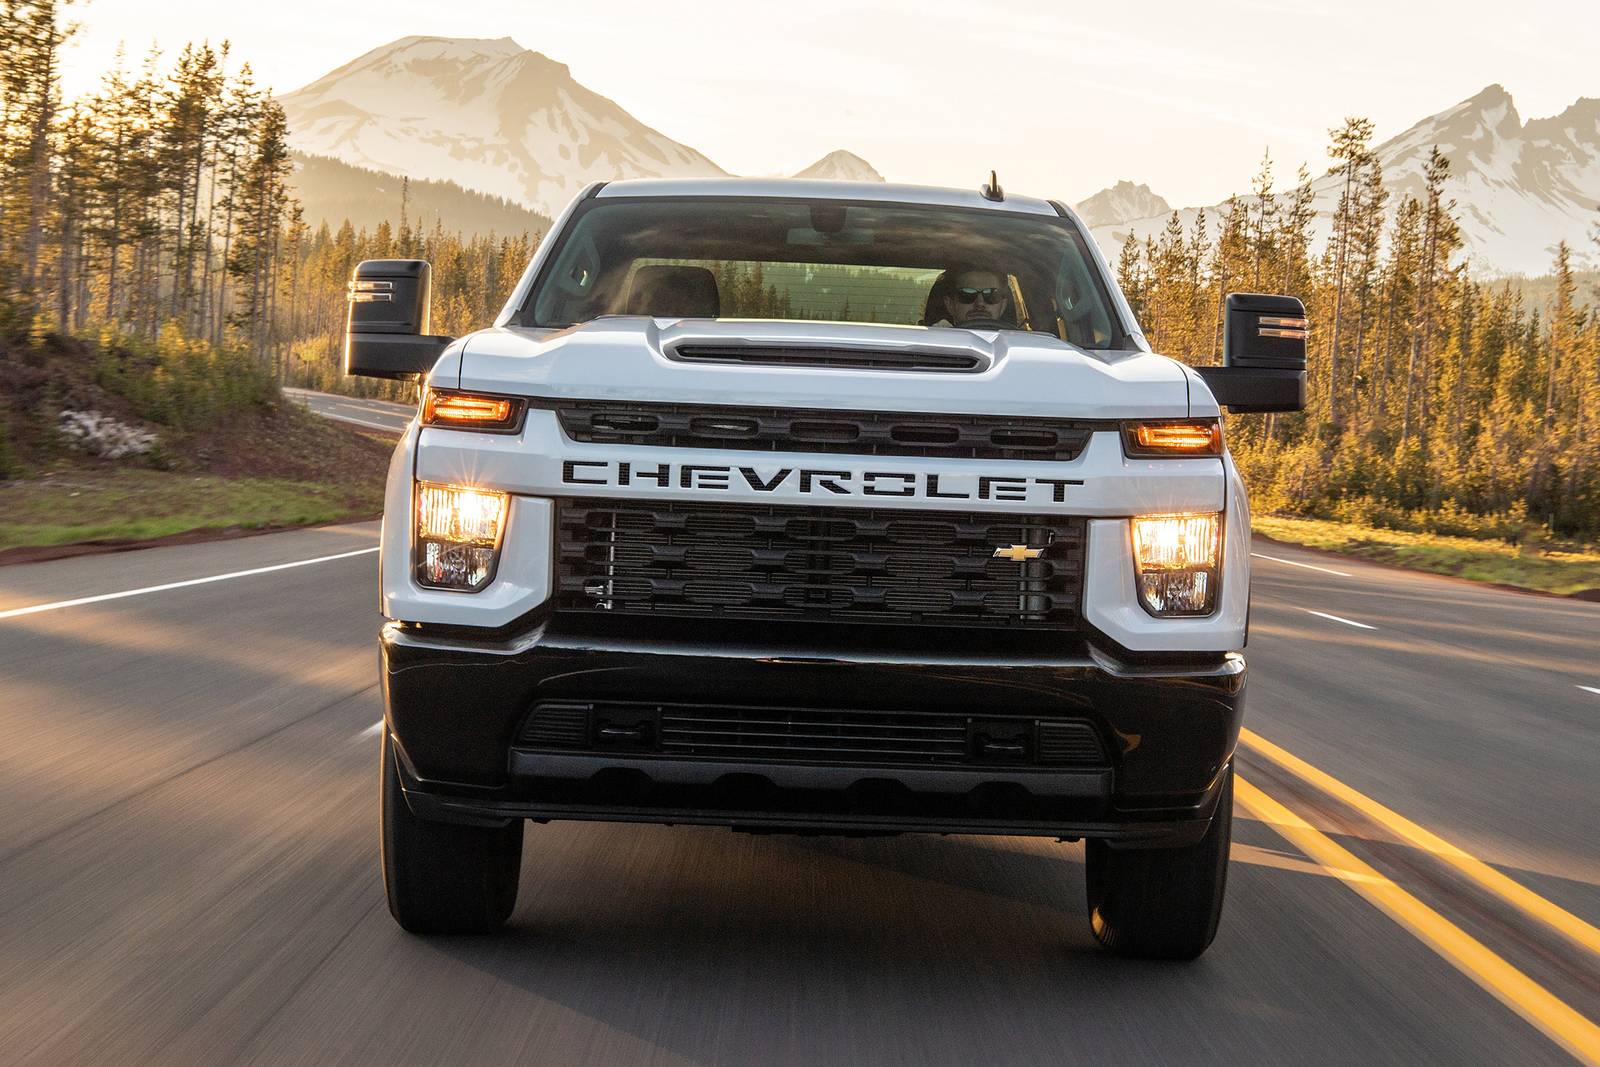 2020 Chevrolet Silverado 2500hd Prices Reviews And Pictures Edmunds